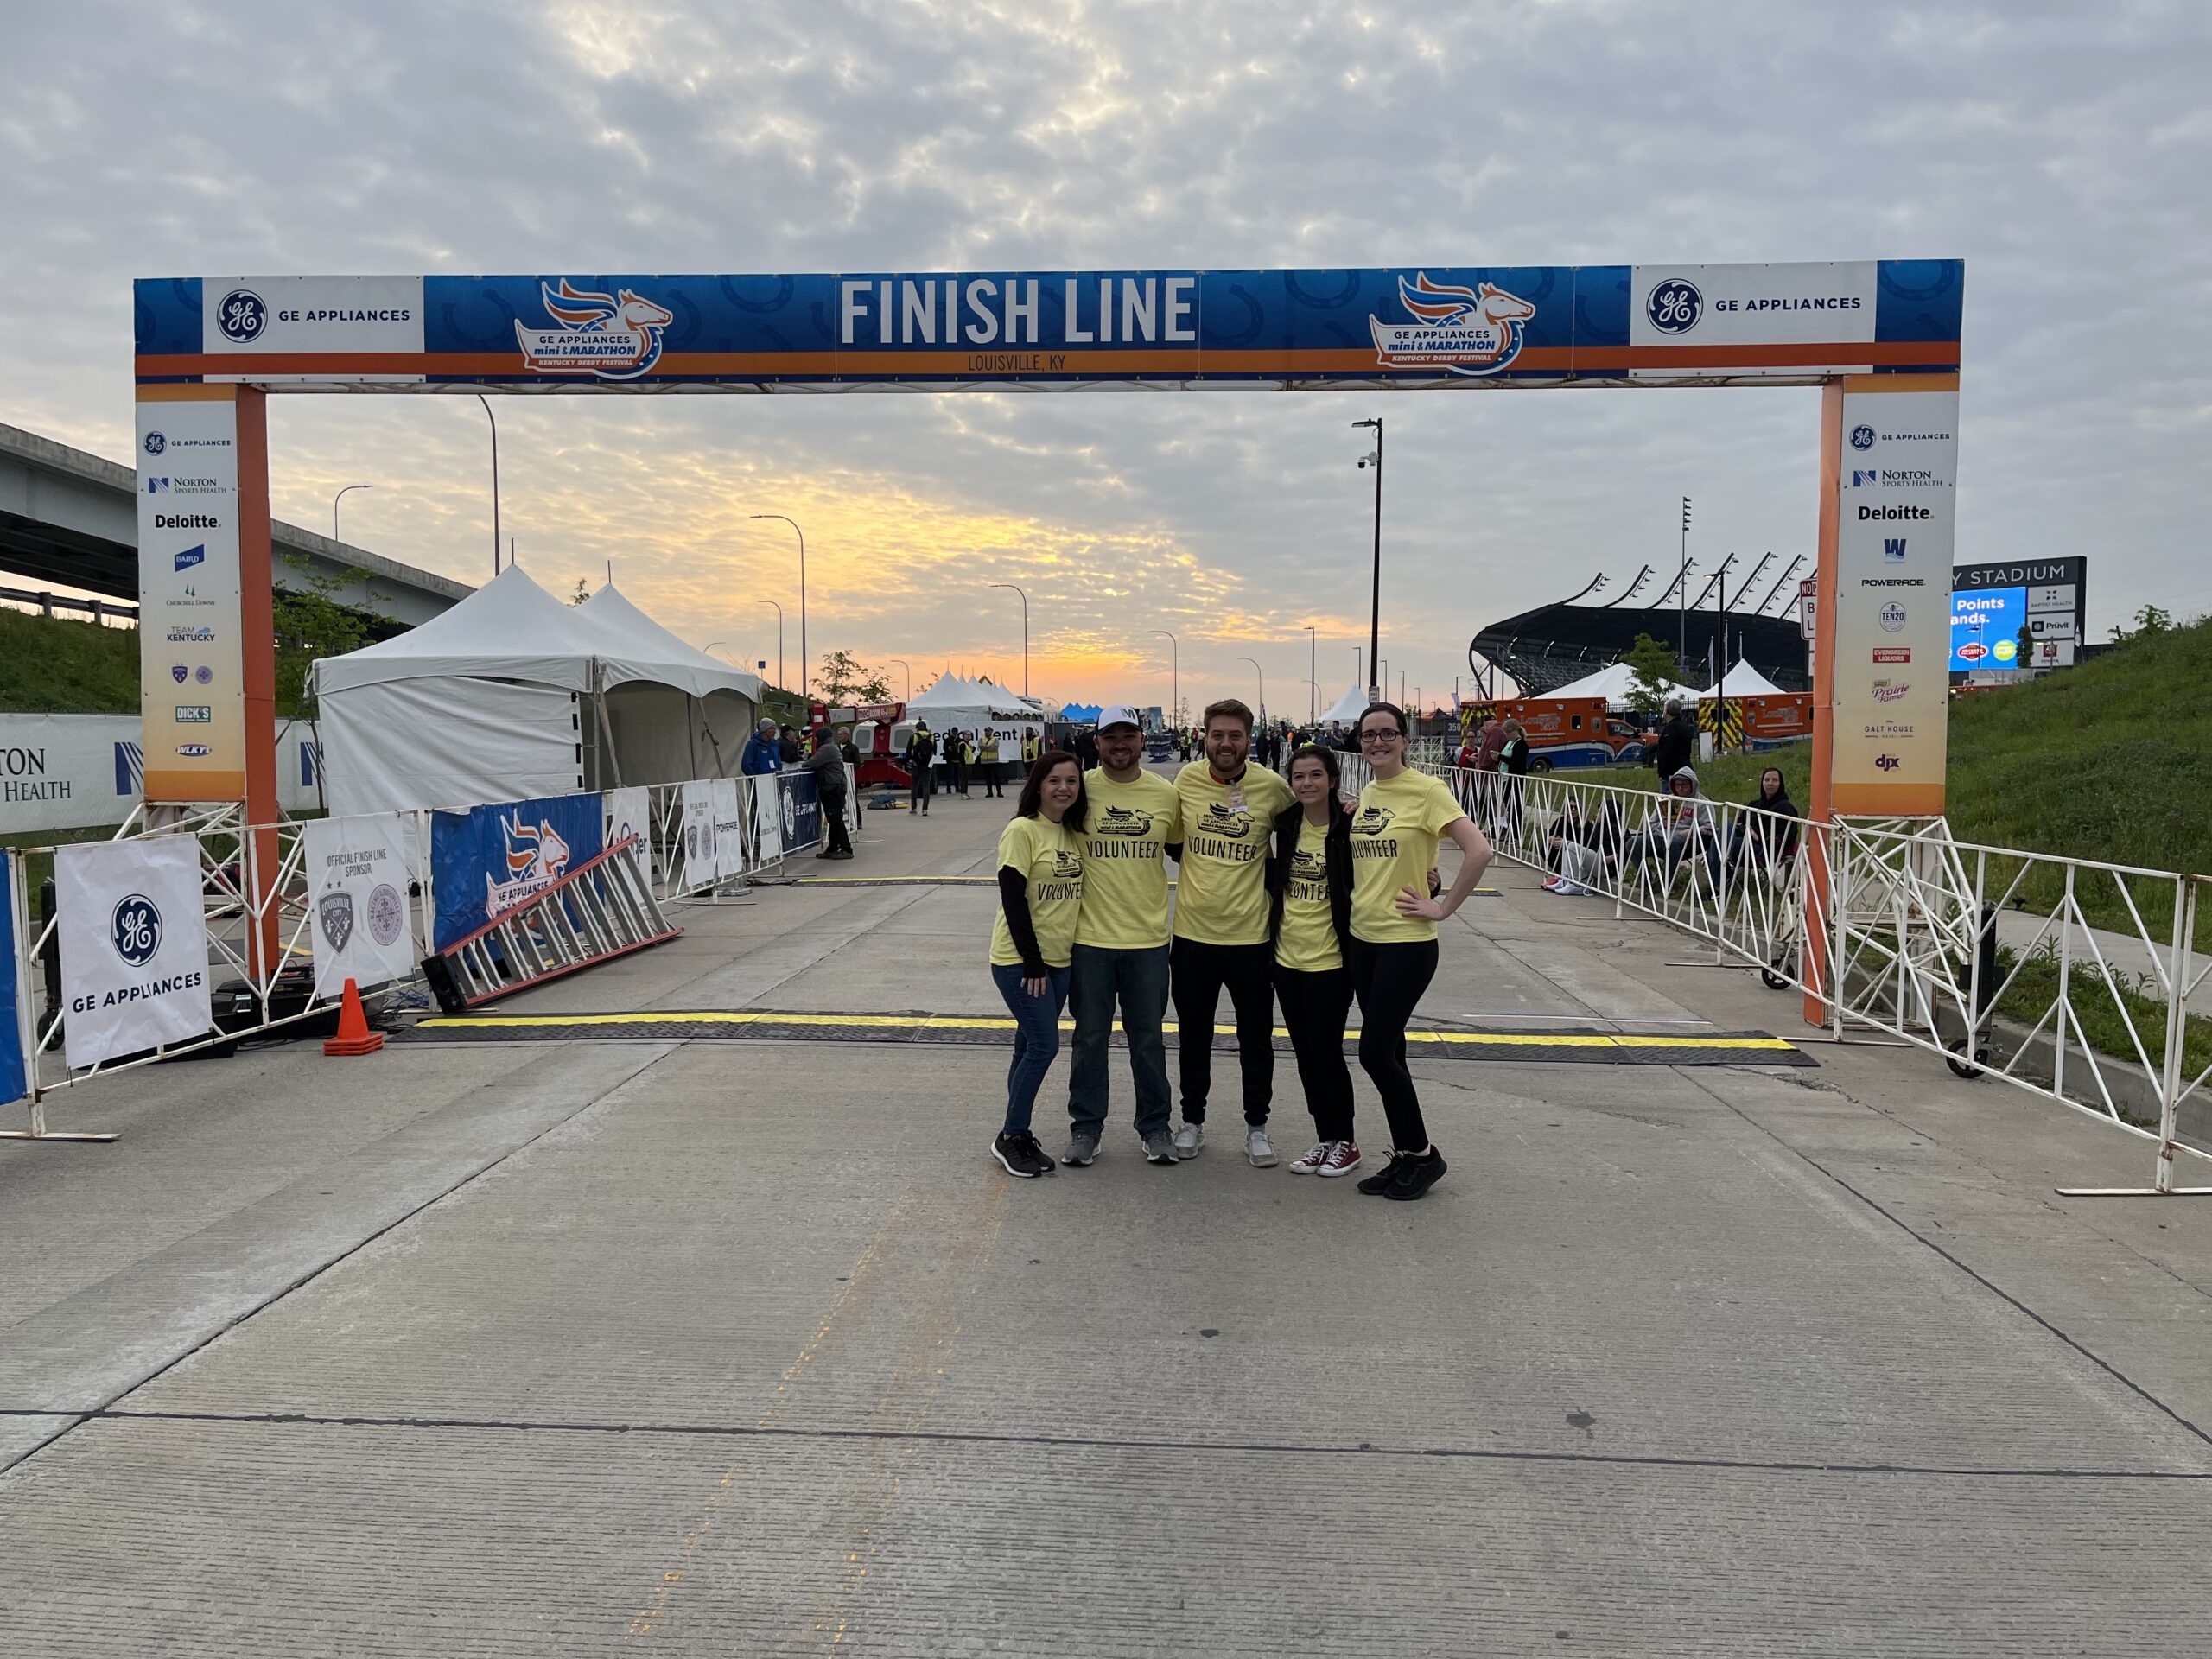 Messer Construction Company employees outside by the finish line at the Kentucky Derby Festival Marathon